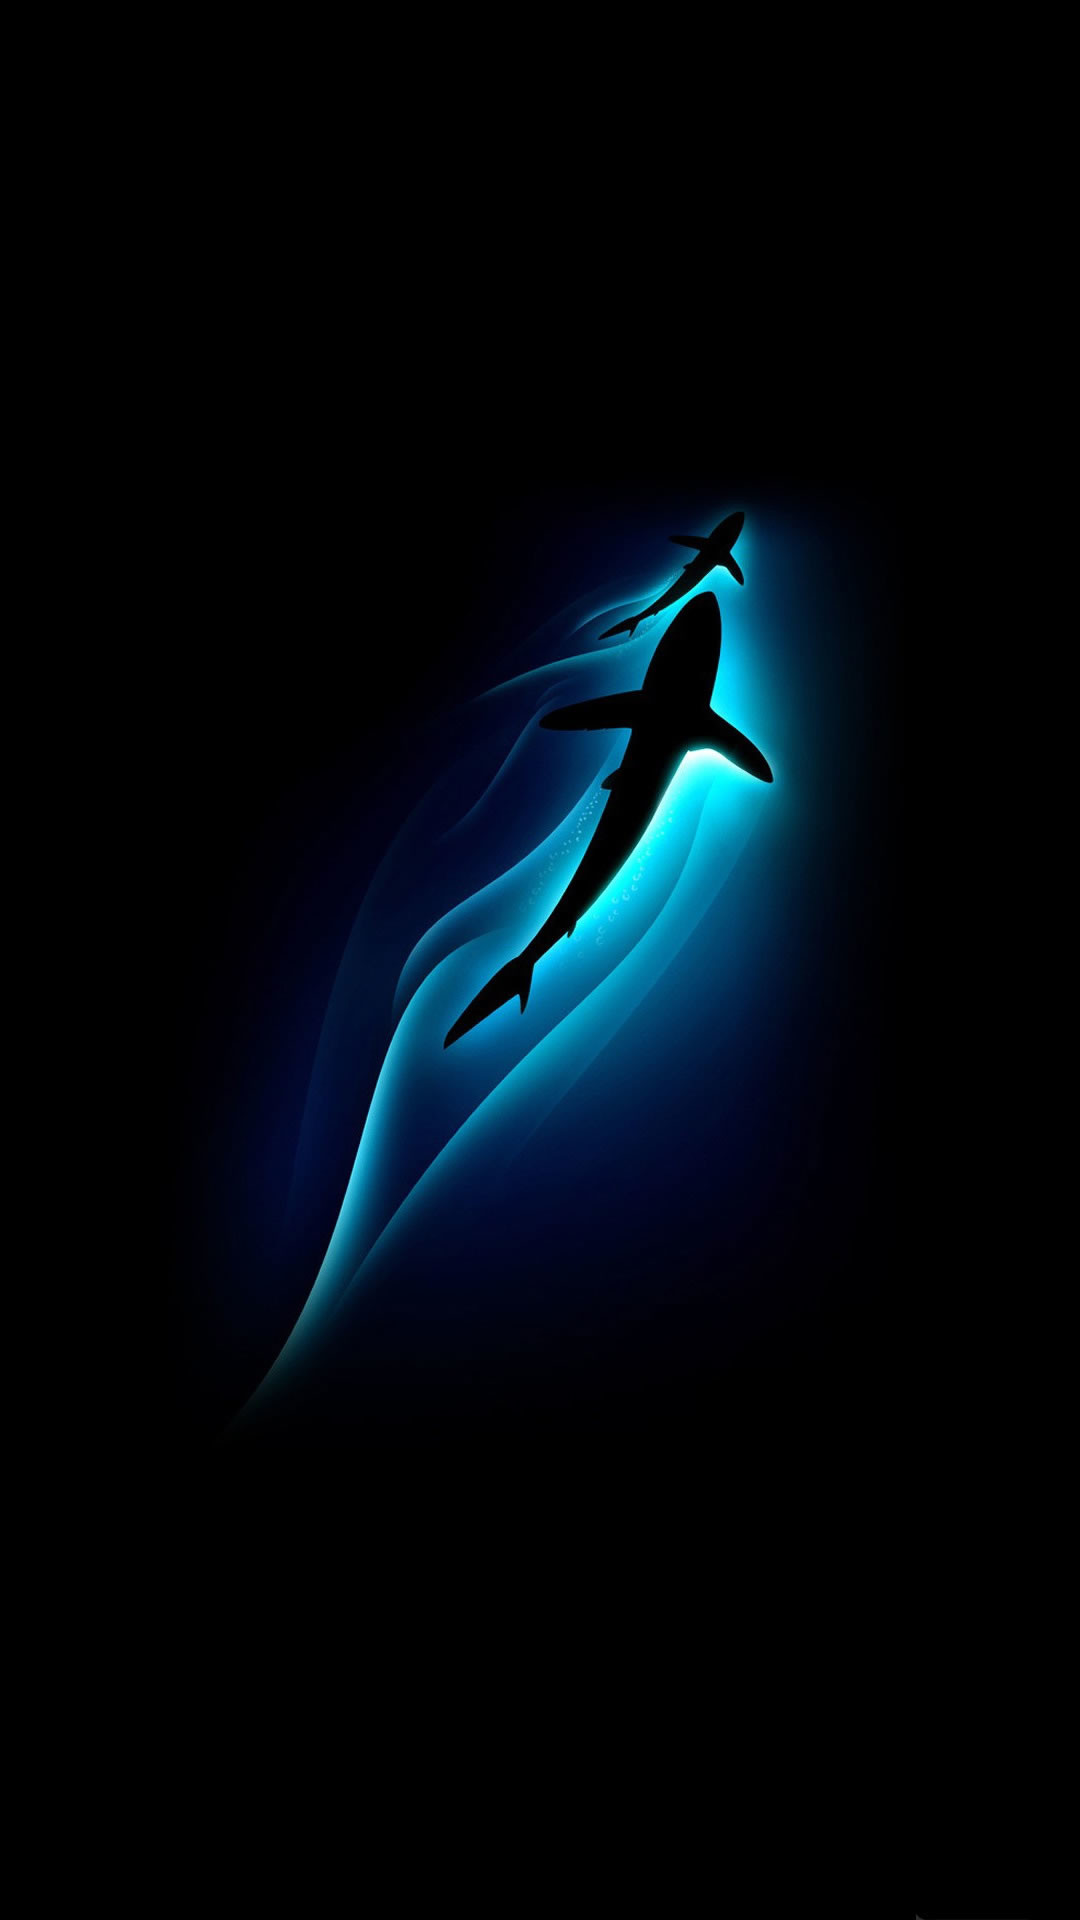 1080x1920 abstract-shark-nokia-wallpapers-for-mobile-